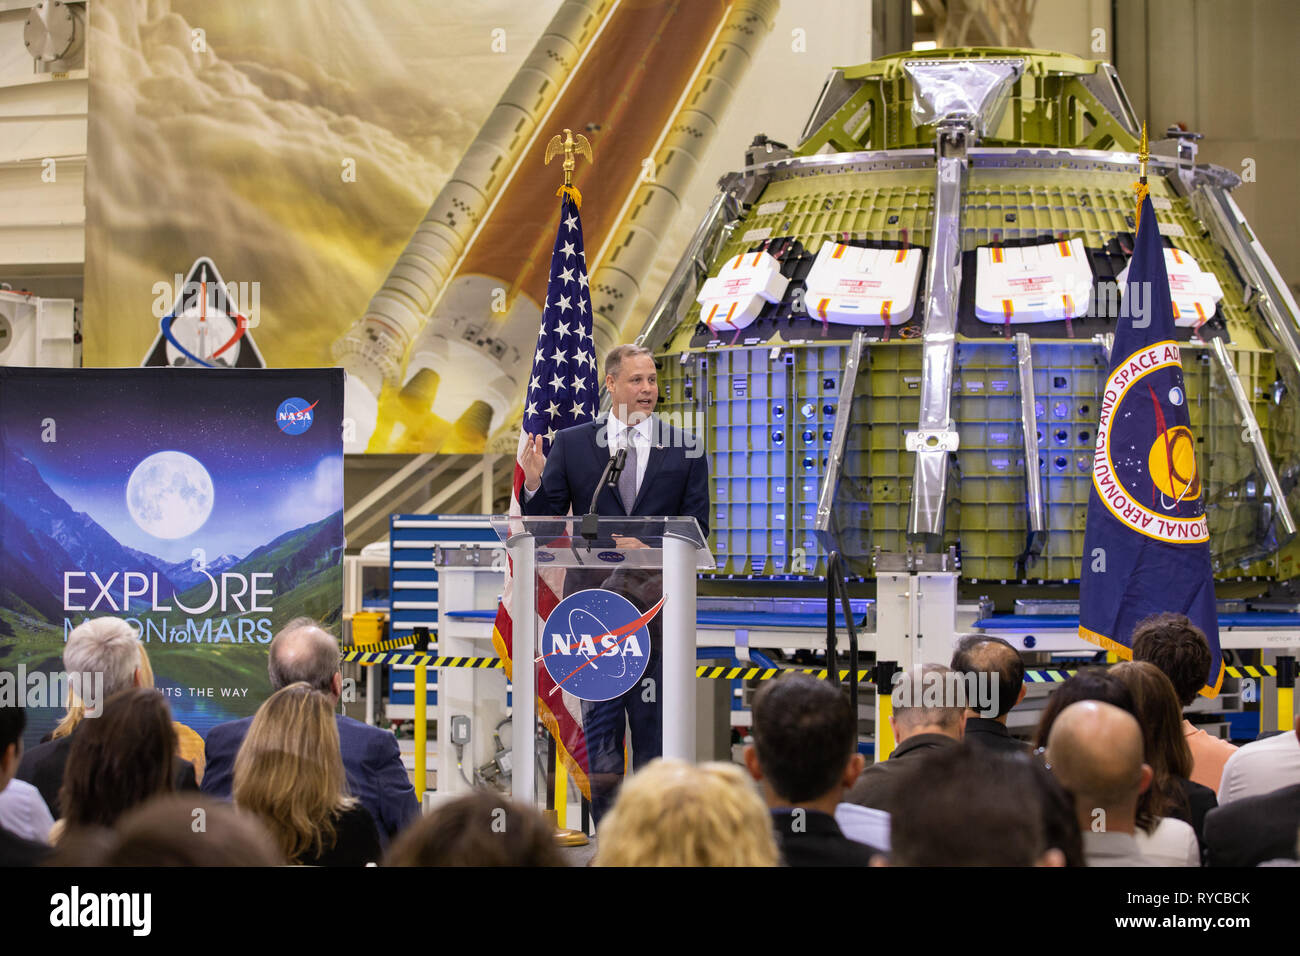 NASA Administrator Jim Bridenstine, standing in front of the new Orion crew capsule, addresses employees on progress toward sending astronauts to the Moon and on to Mars during a televised event at the Kennedy Space Center March 11, 2019 in Cape Canaveral, Florida. Stock Photo